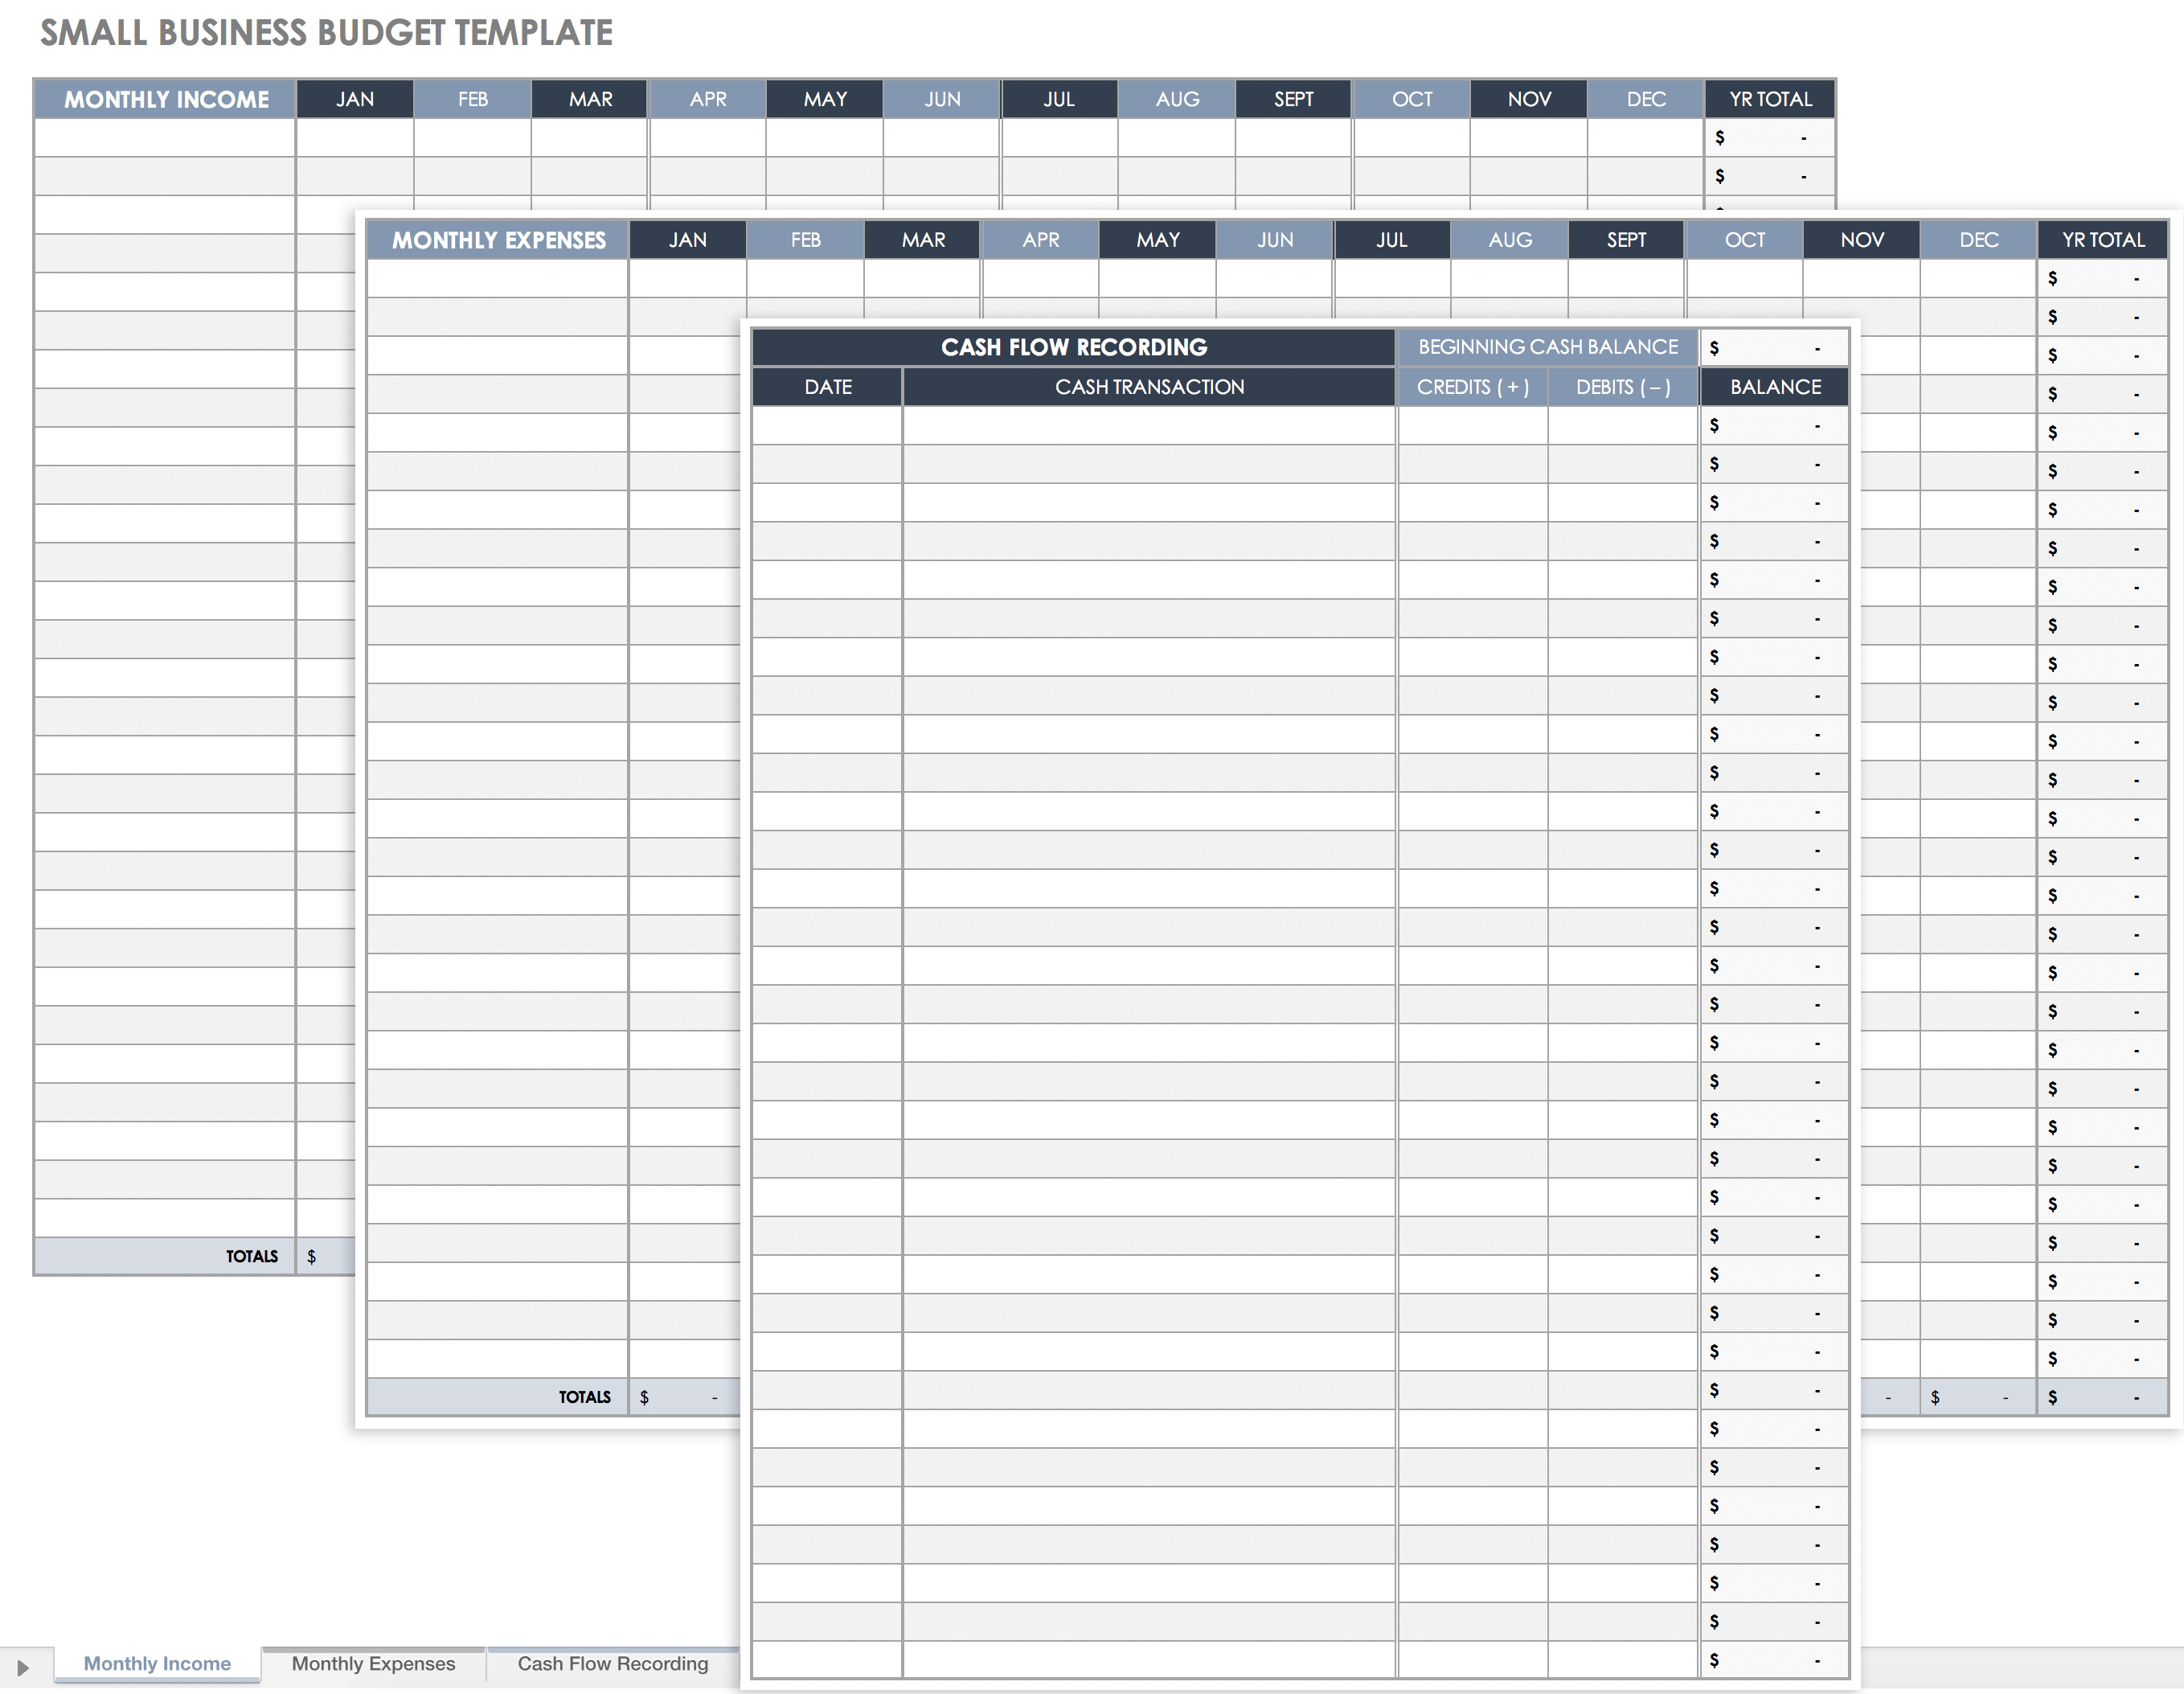 Free Small Business Budget Templates  Smartsheet Regarding Financial Budget Template For Business Inside Financial Budget Template For Business